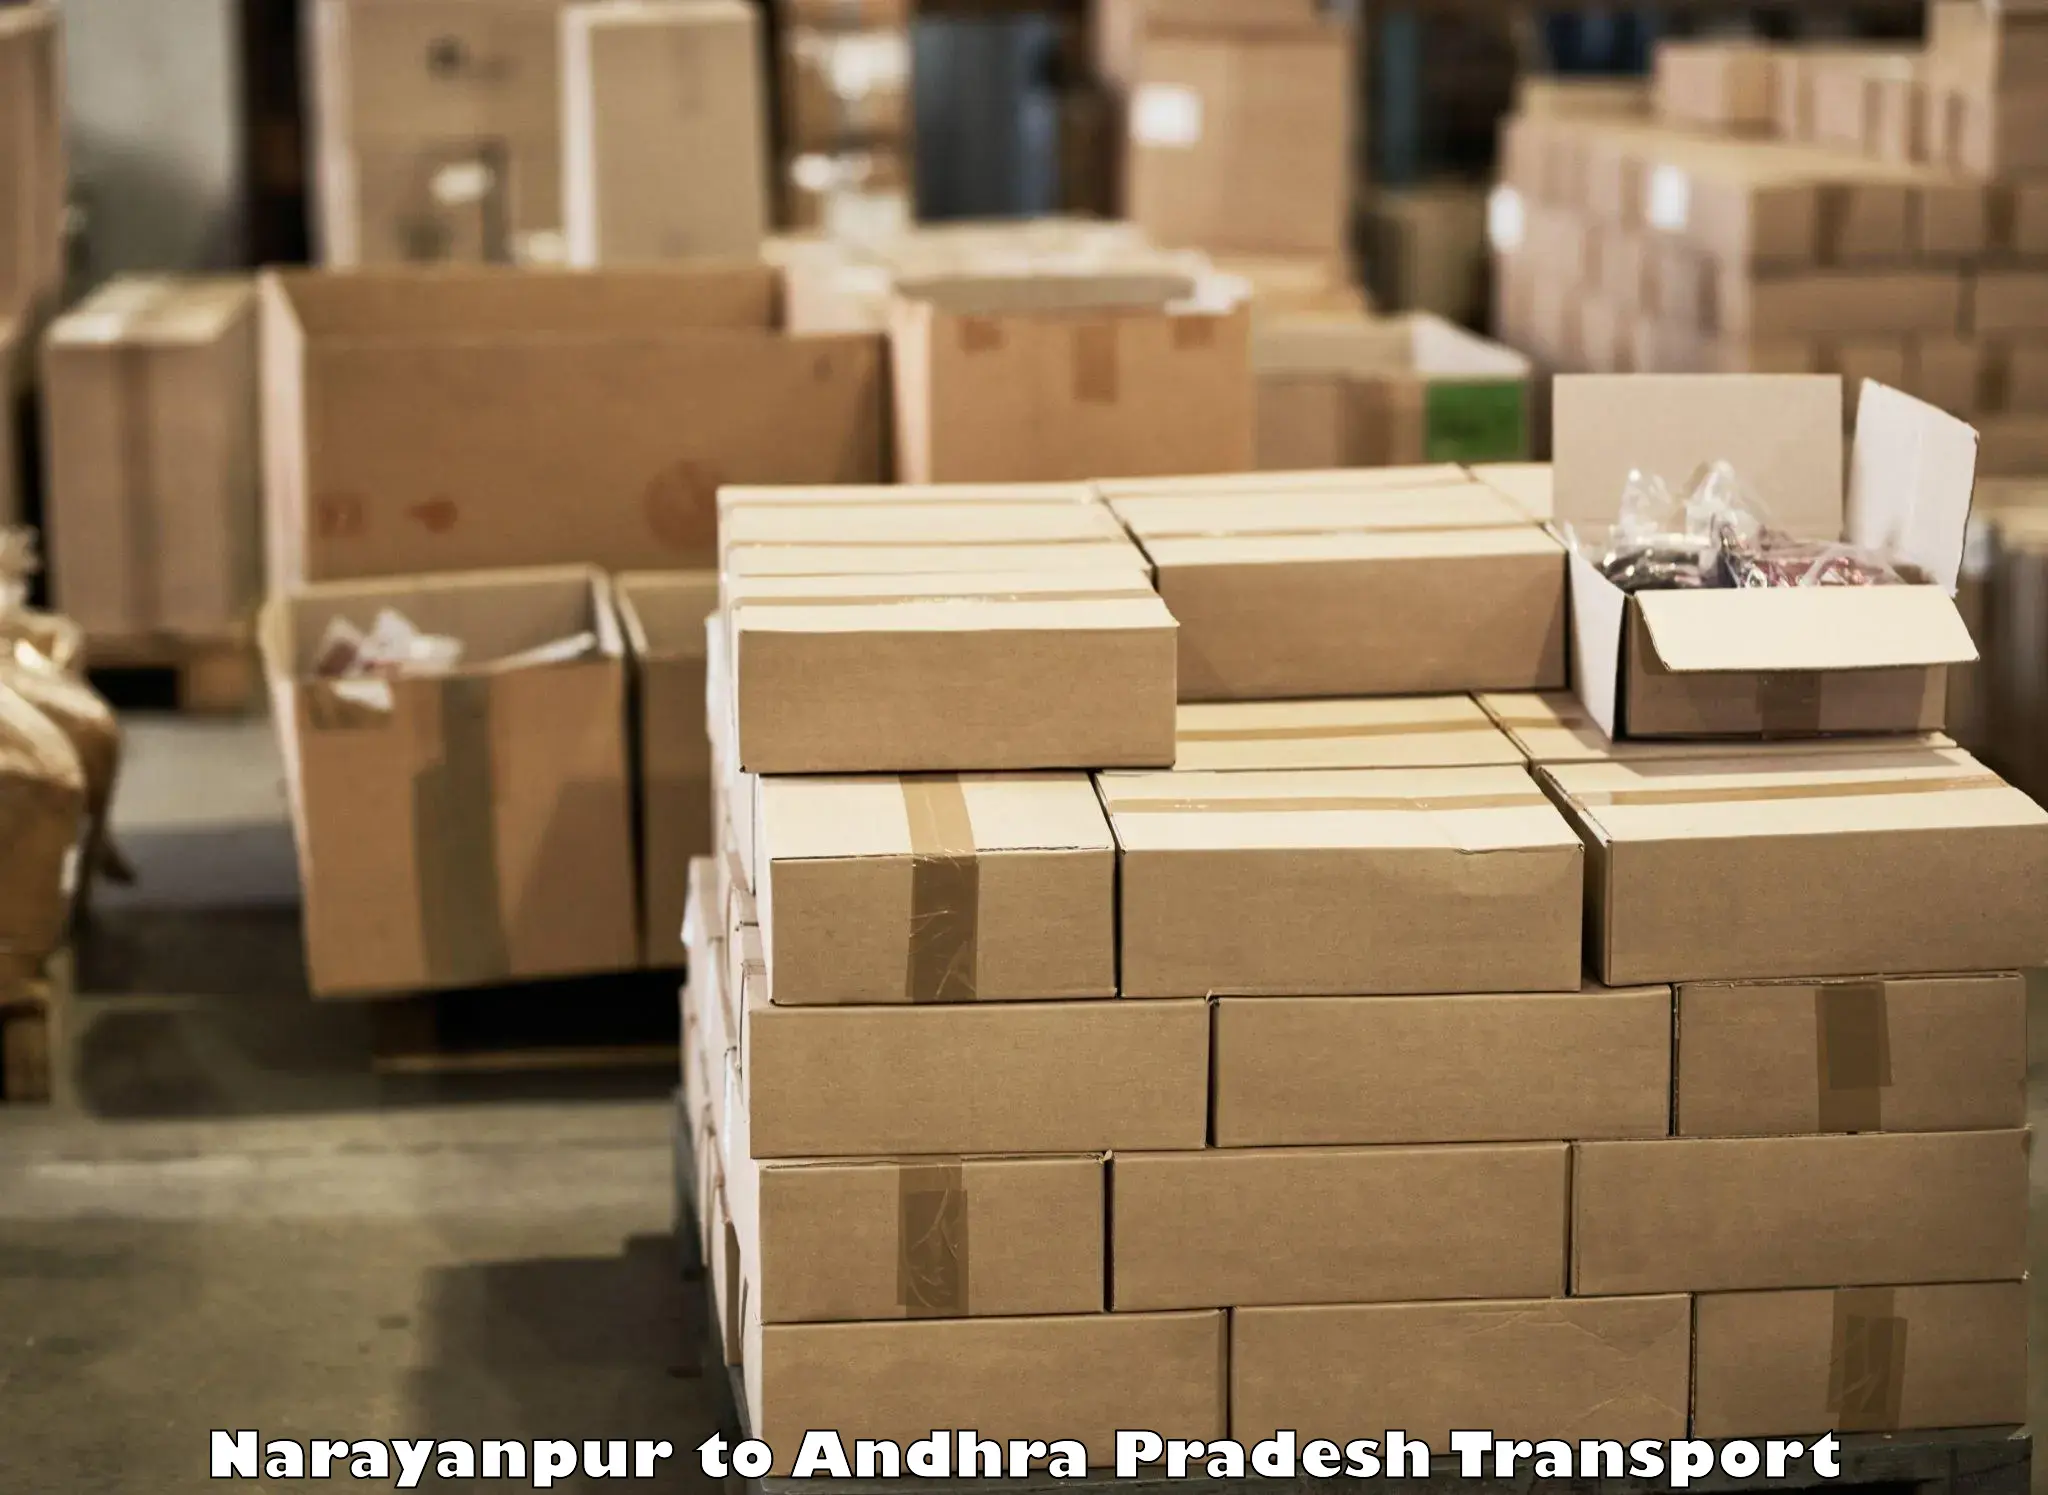 Daily parcel service transport Narayanpur to Buckinghampet